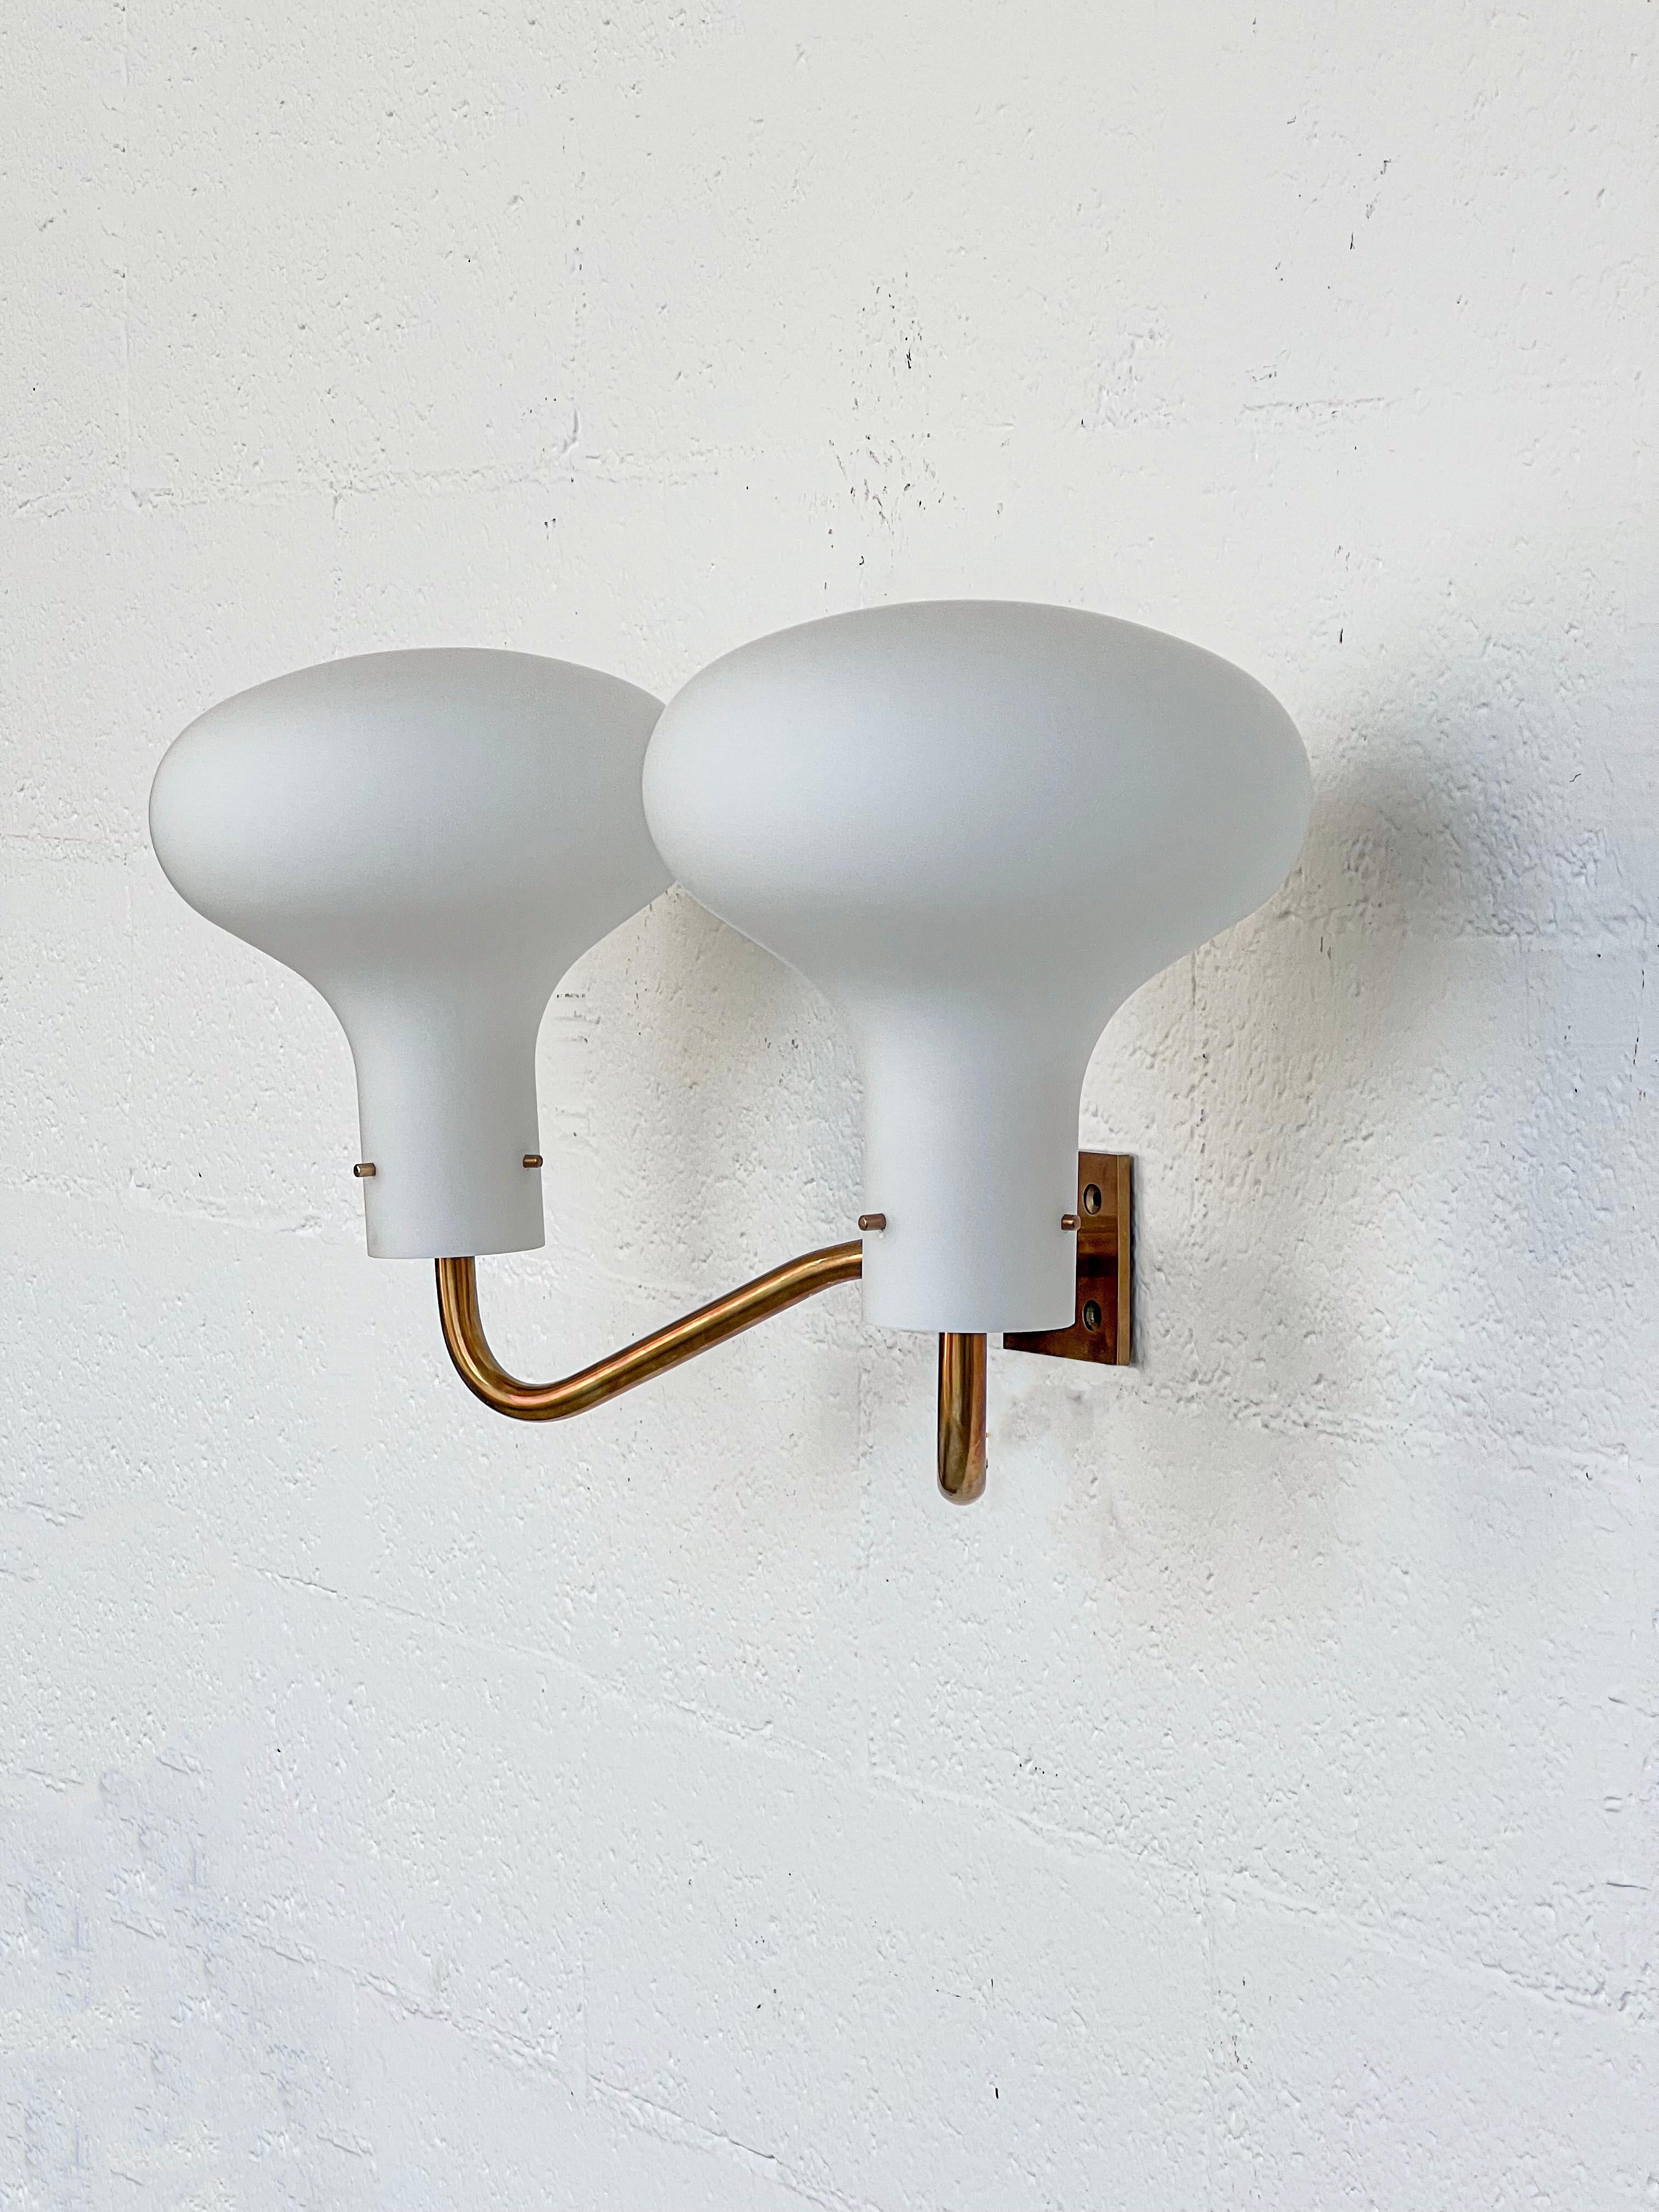 Available is a pair of vintage Italian LP12 sconces by Ignazio Gardella, brass frame and opaline glass mushroom-shaped lightshades. Some collectors indeed nickname these lamps 